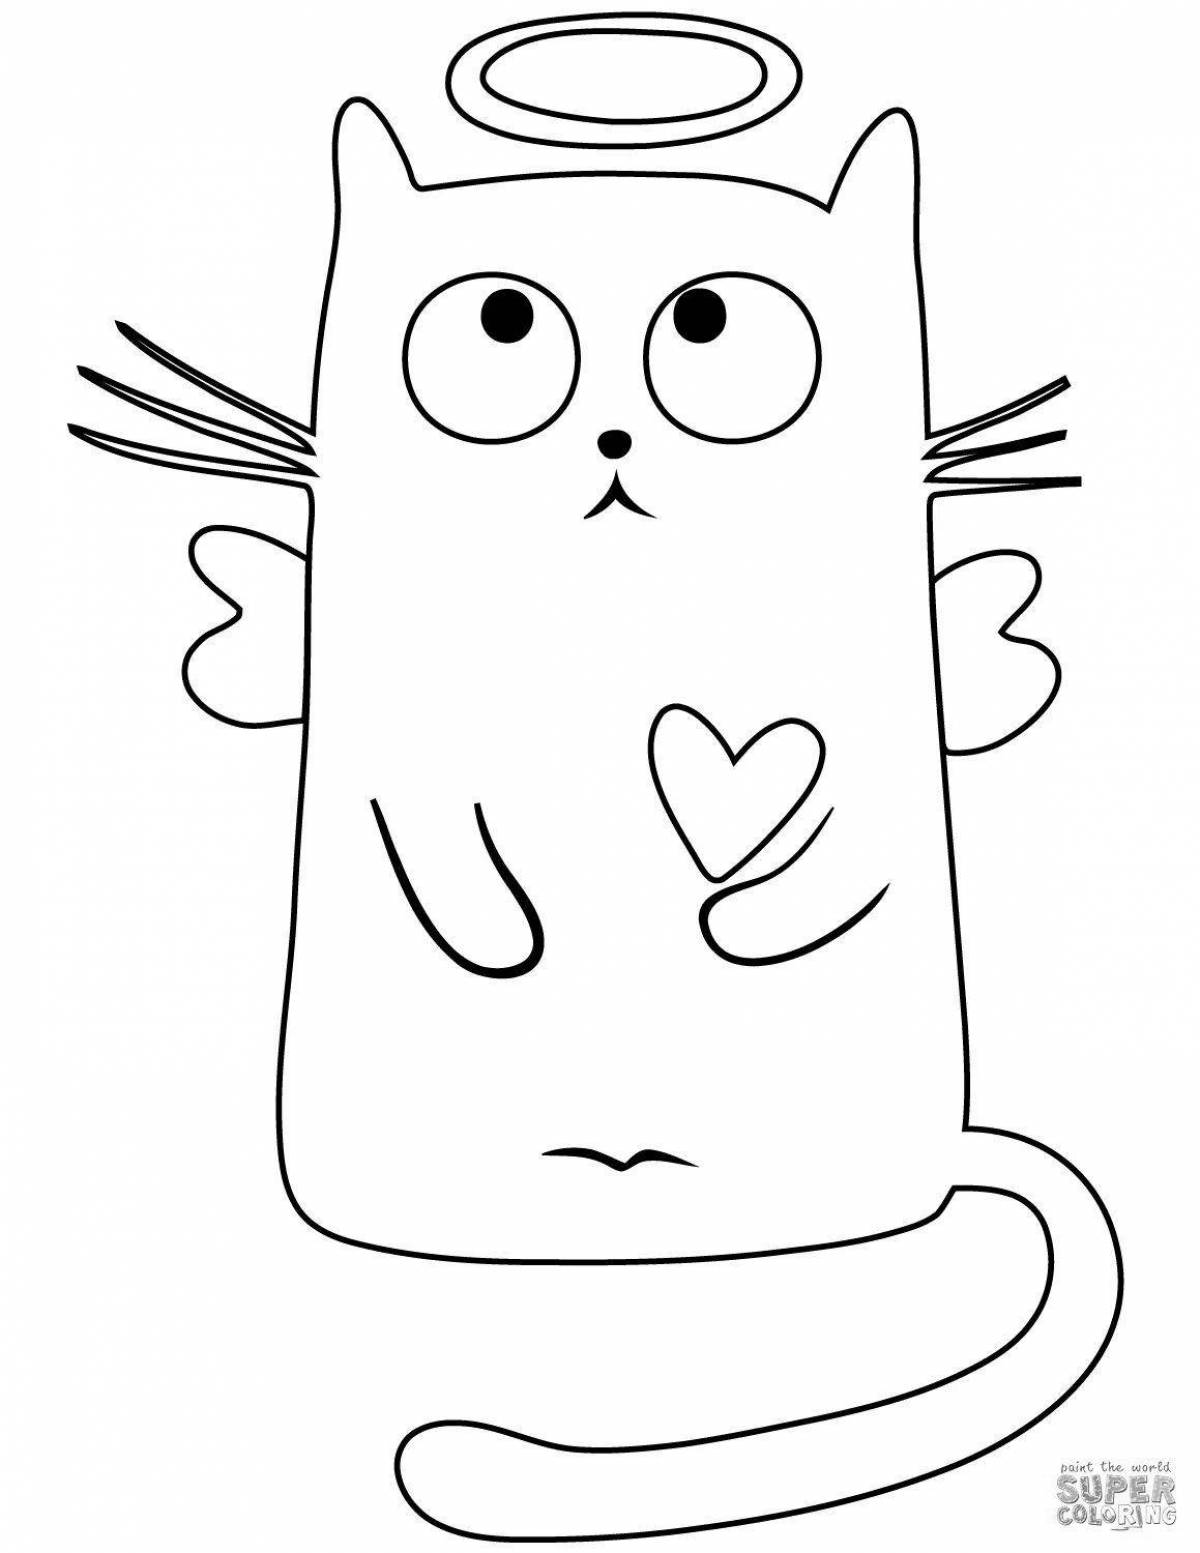 Alert bw cat coloring page